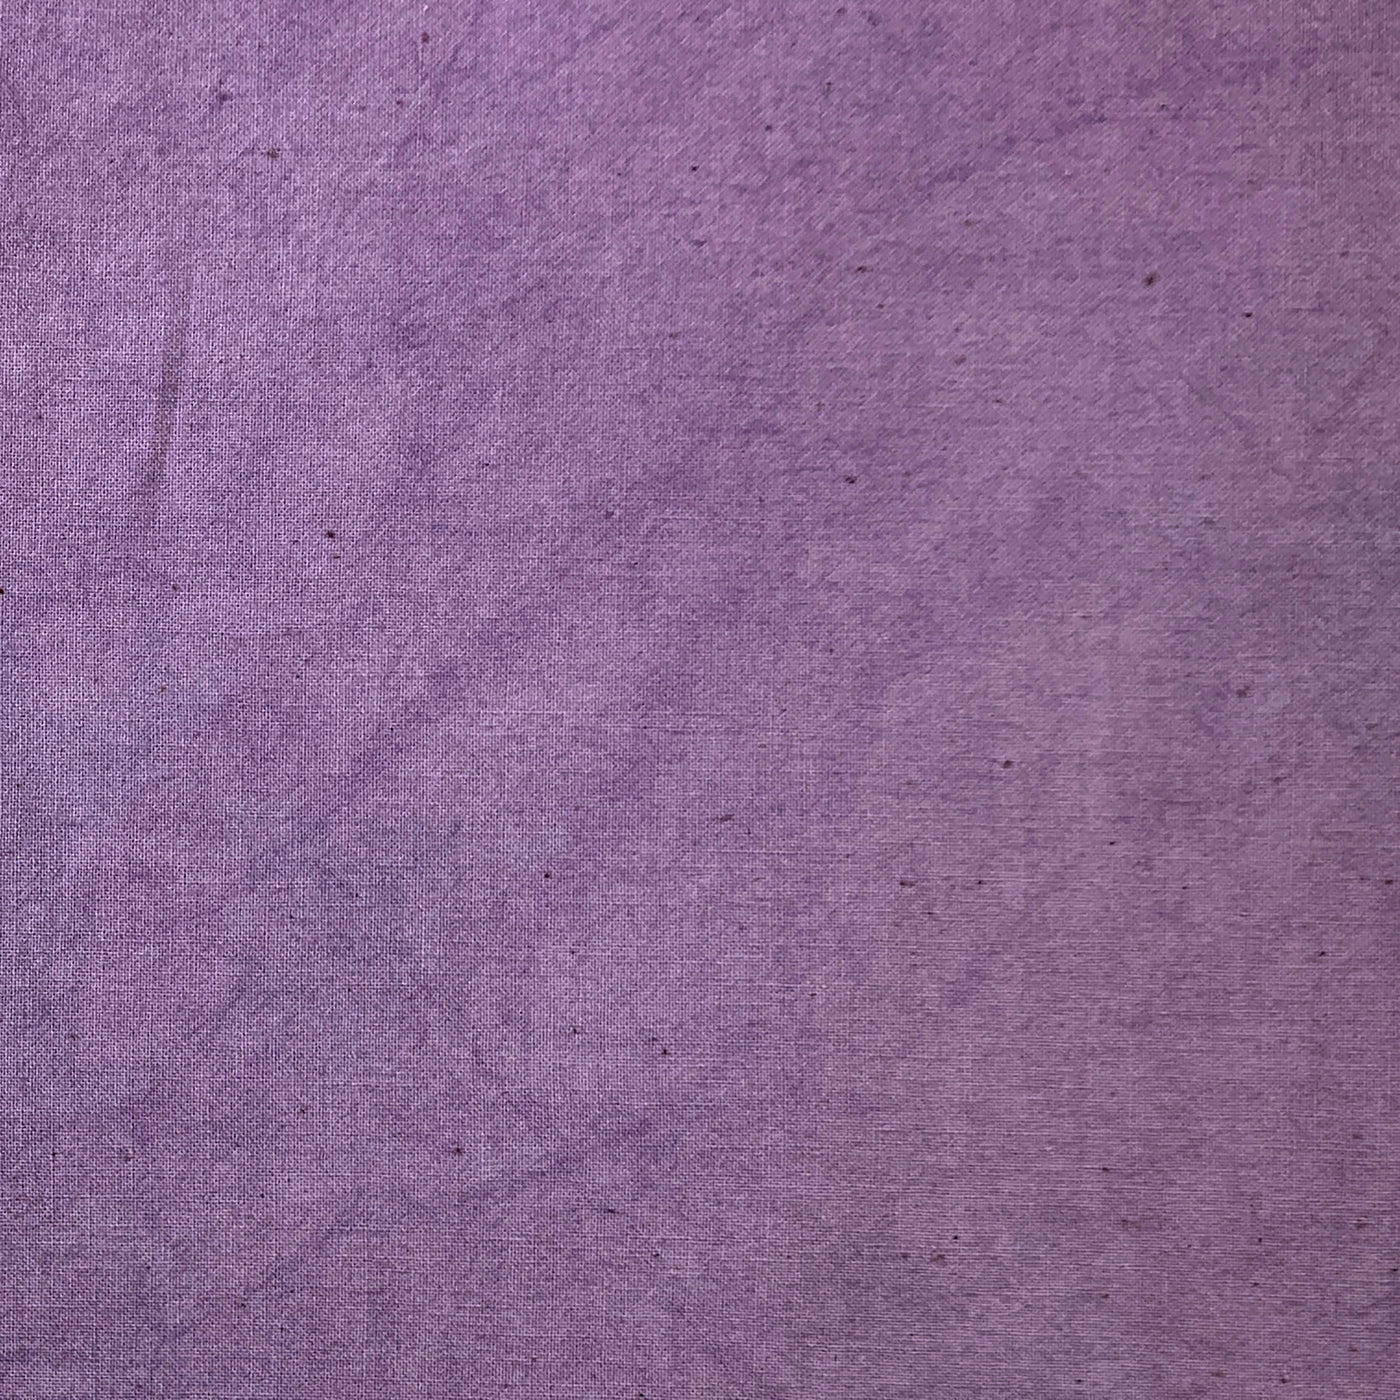 Cherrywood Hand Dyed Fabric - Aster 1040